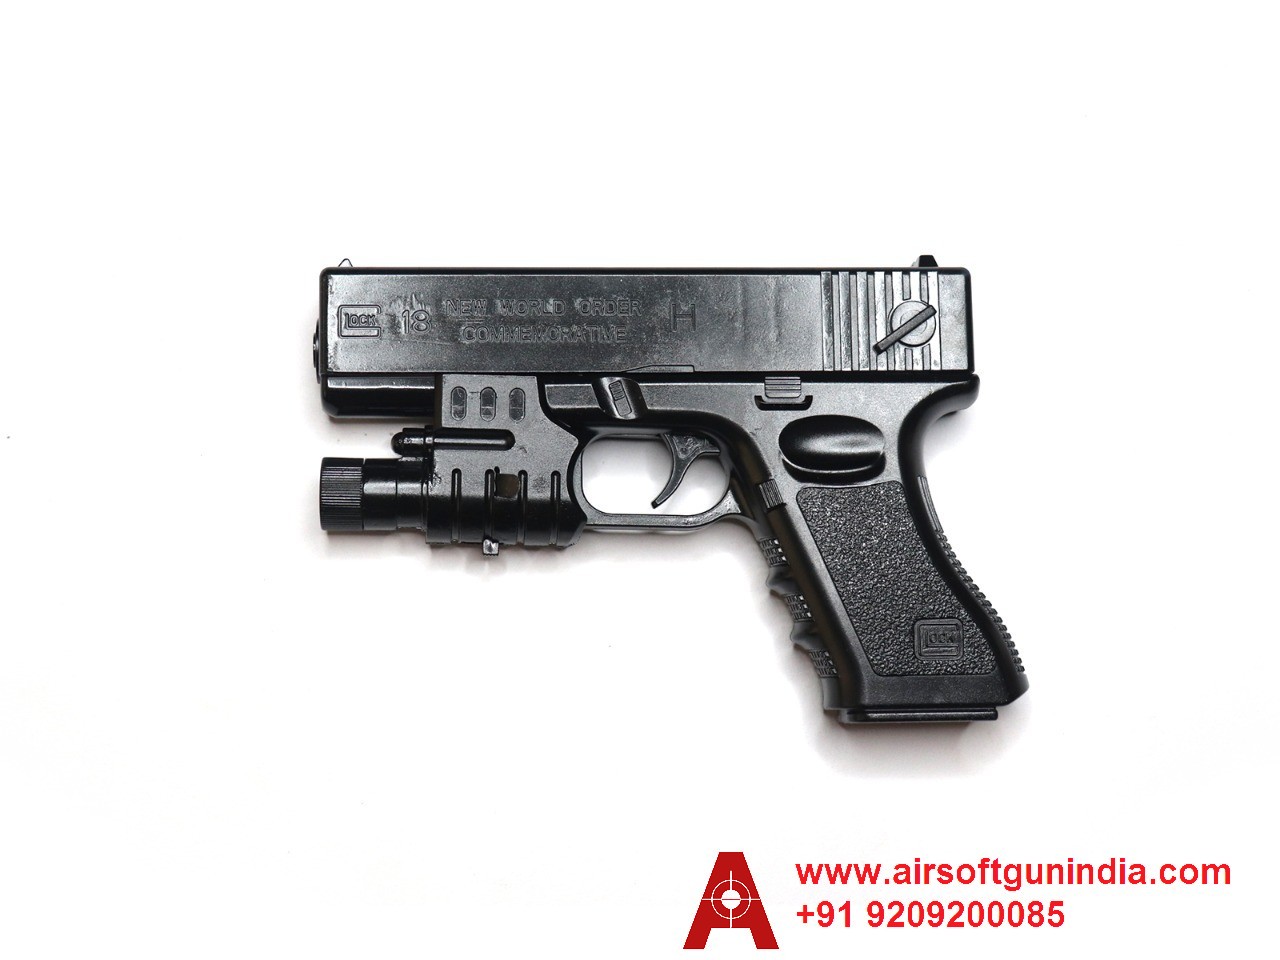 Glock 18 Spring Plastic Toy For Kids By Airsoft Gun India